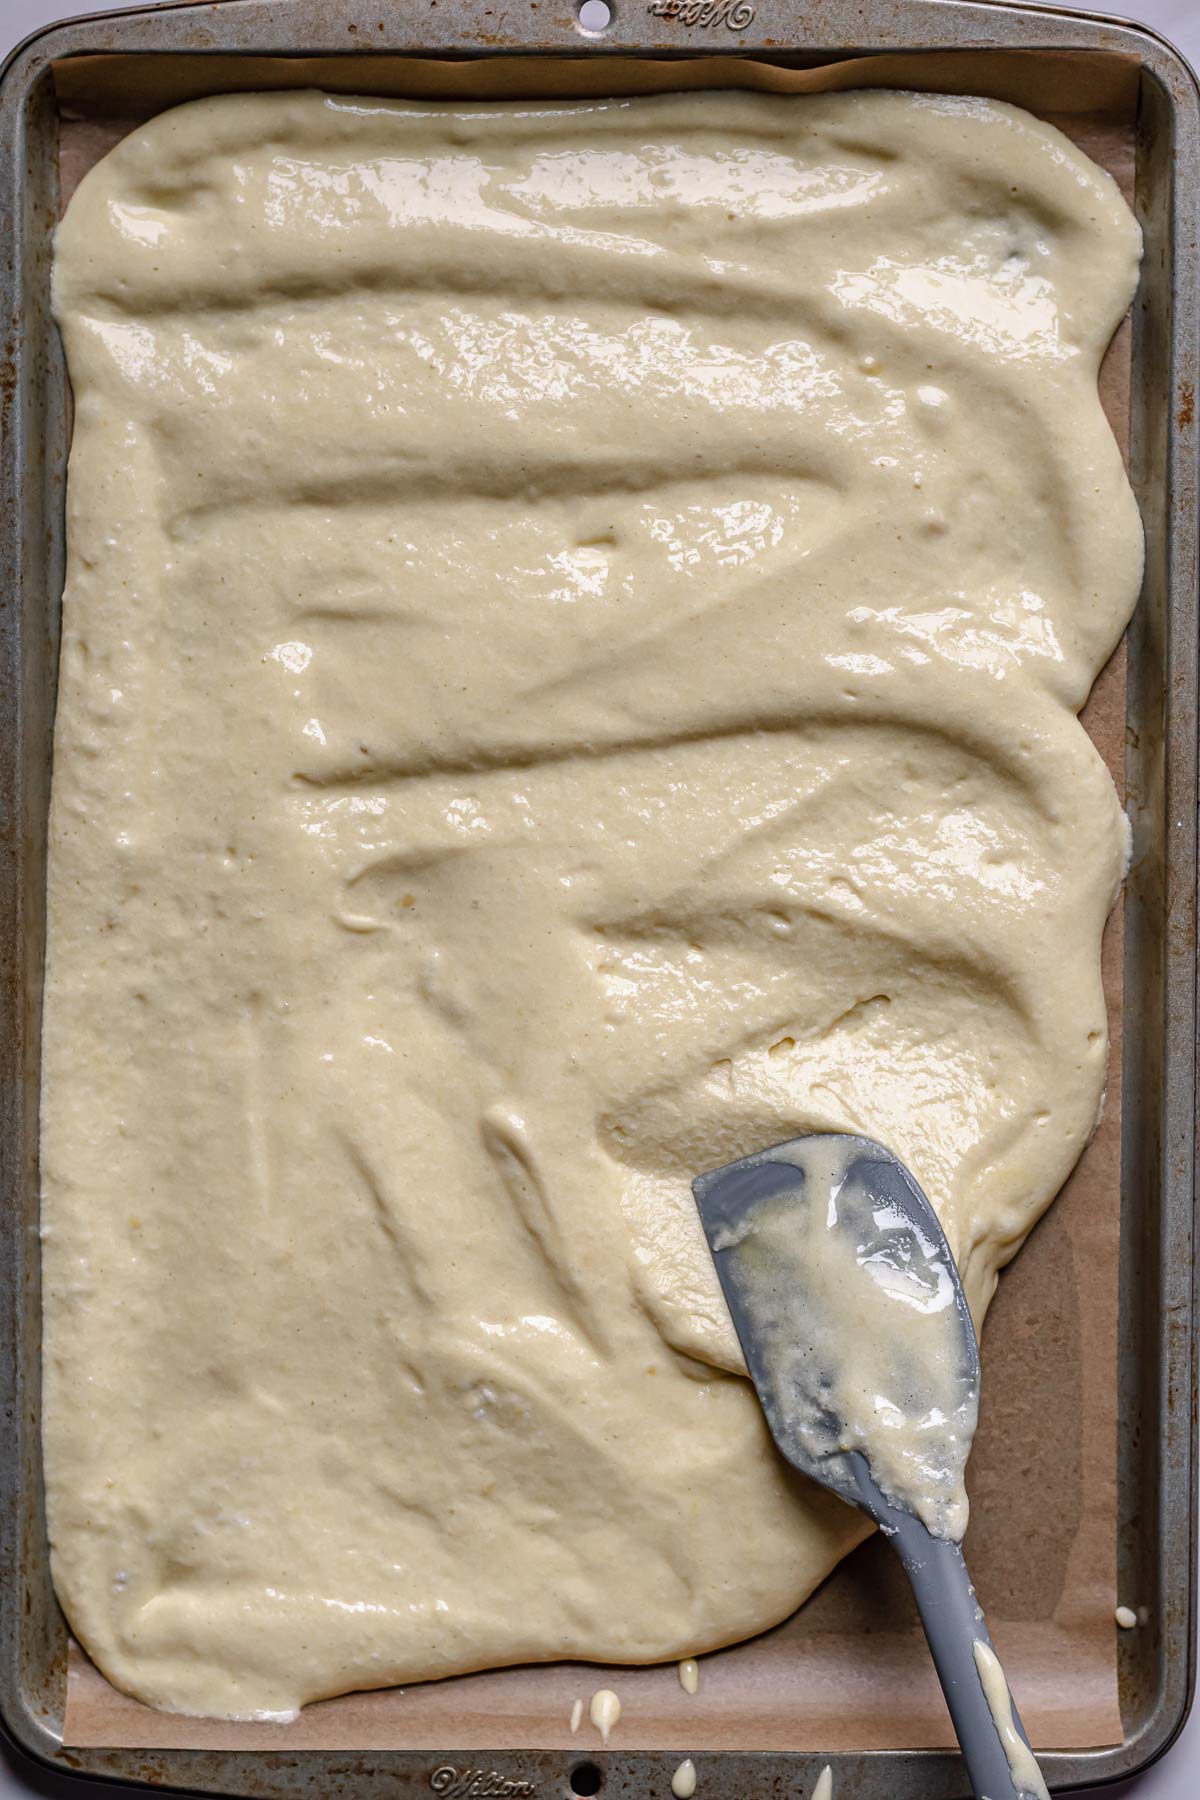 A spatula spreads batter evenly in the pan.